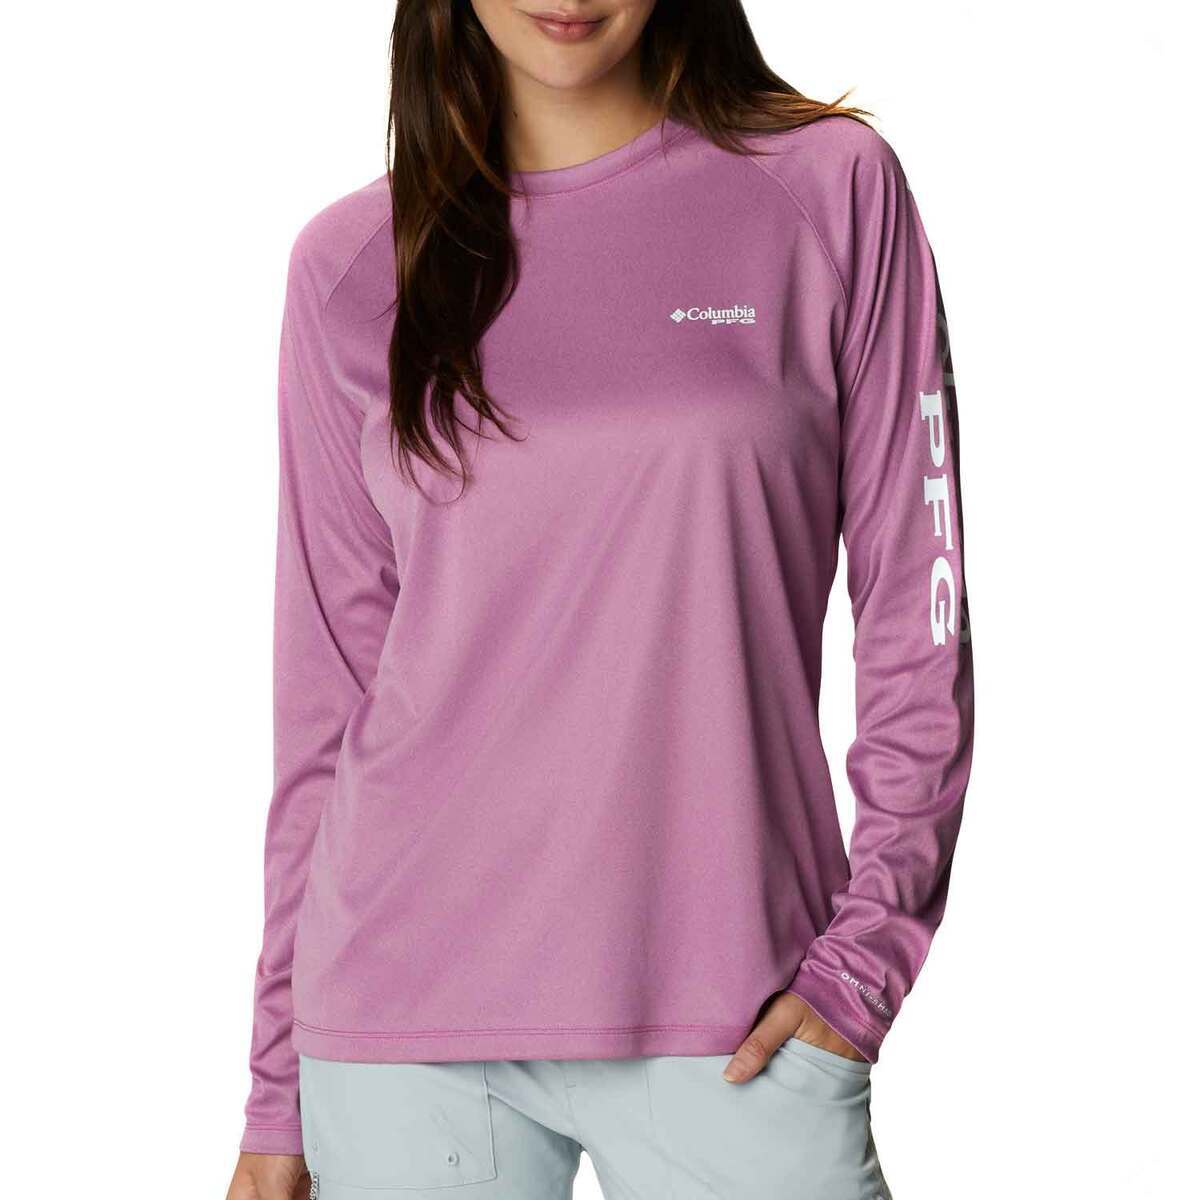 Womens Casual Pants, Outdoor Apparel & Gear